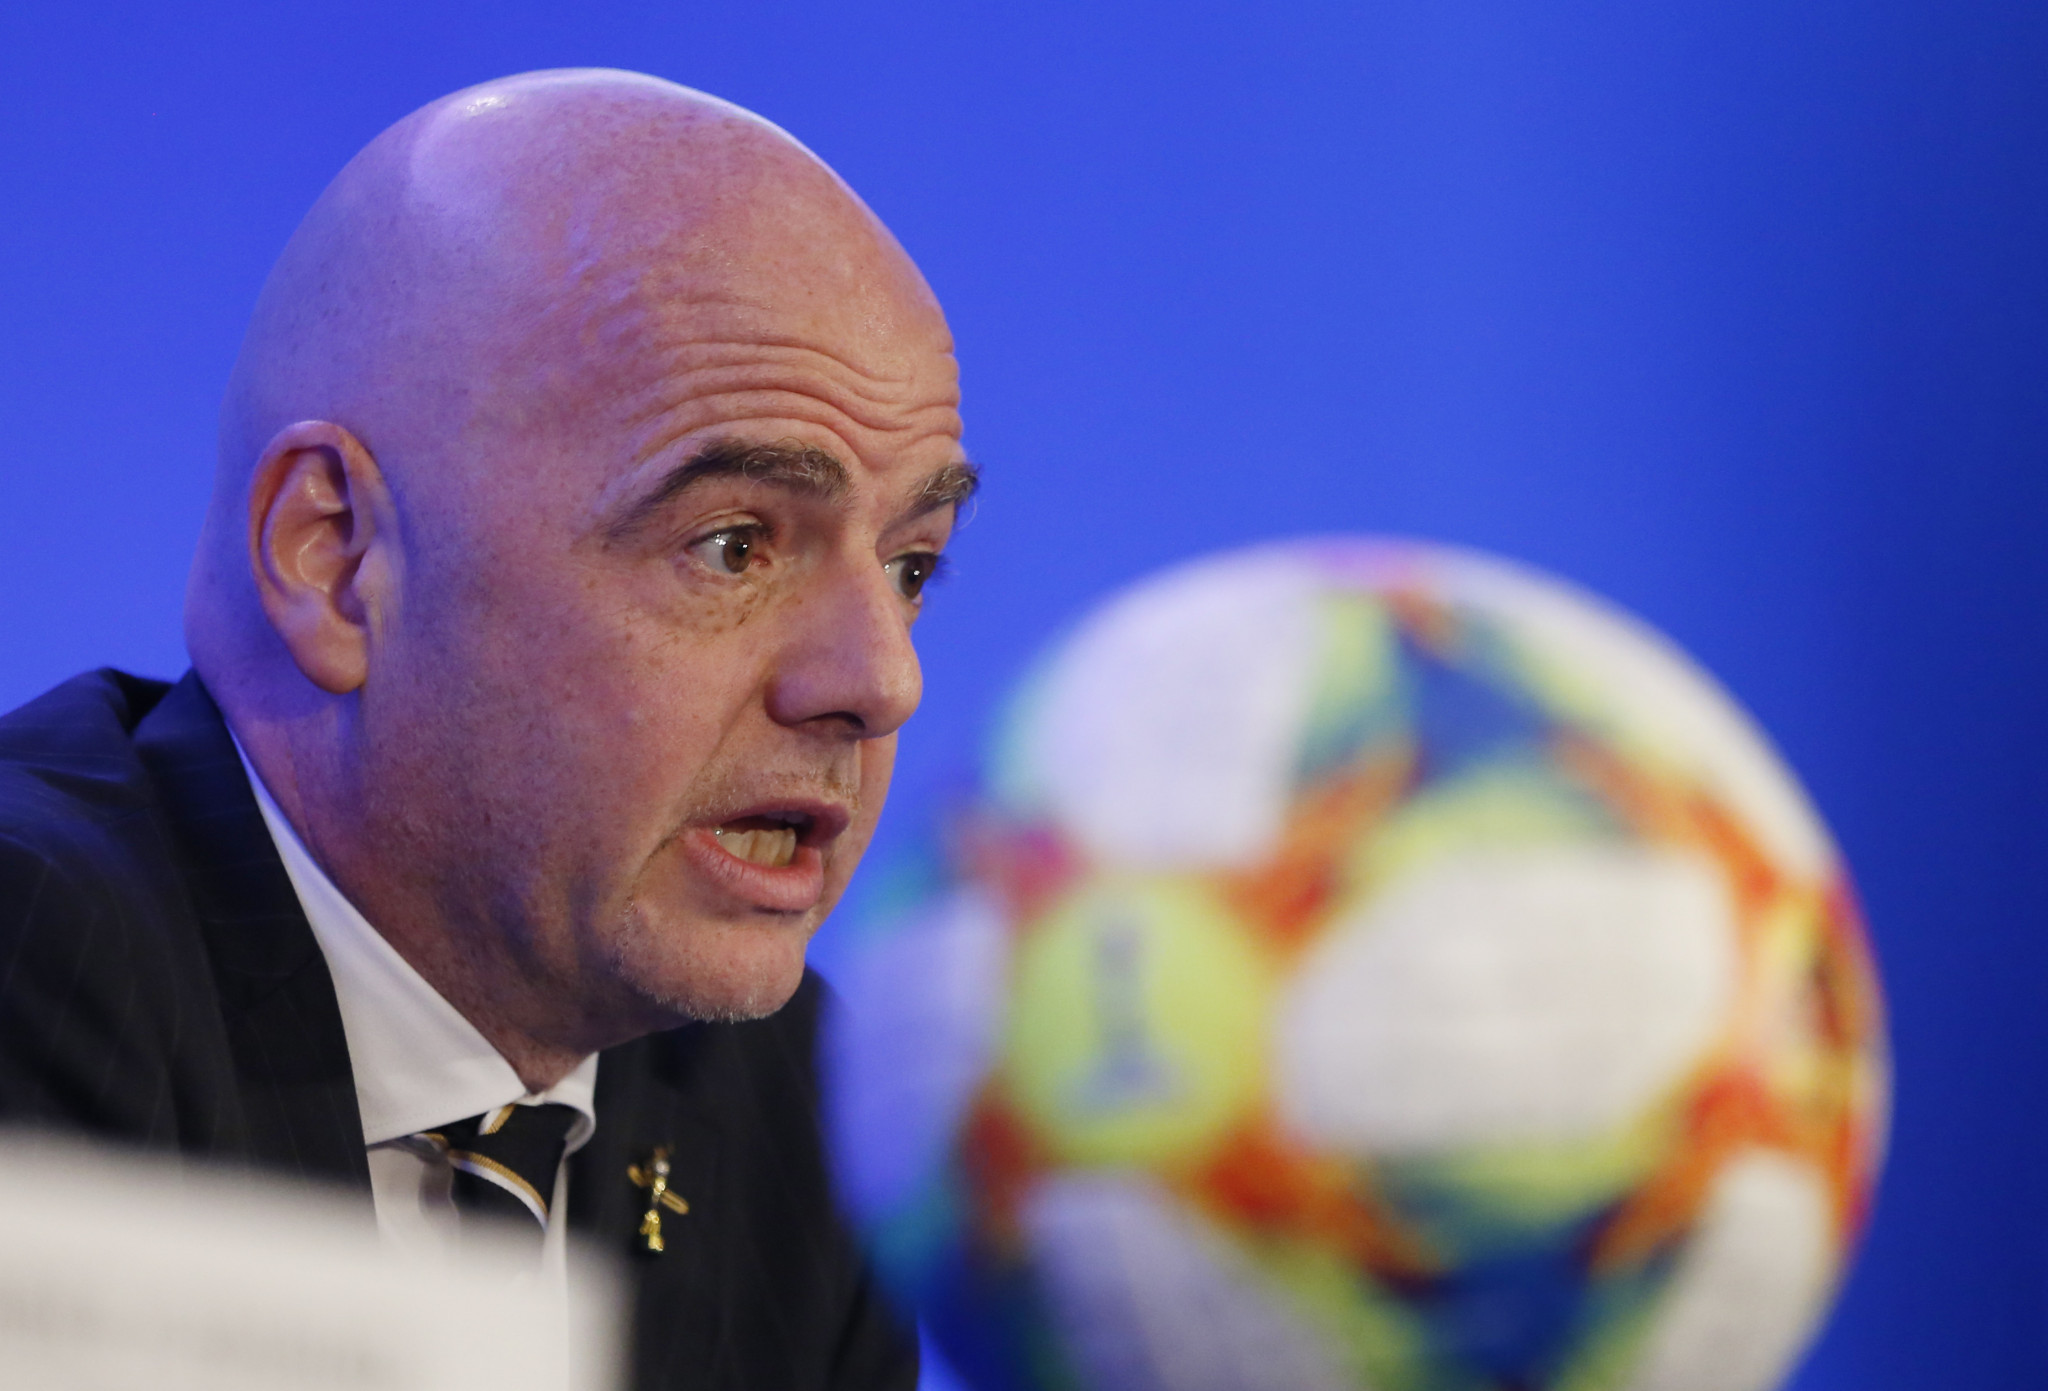 FIFA President Gianni Infantino has condemned recent racist incidents in football ©Getty Images